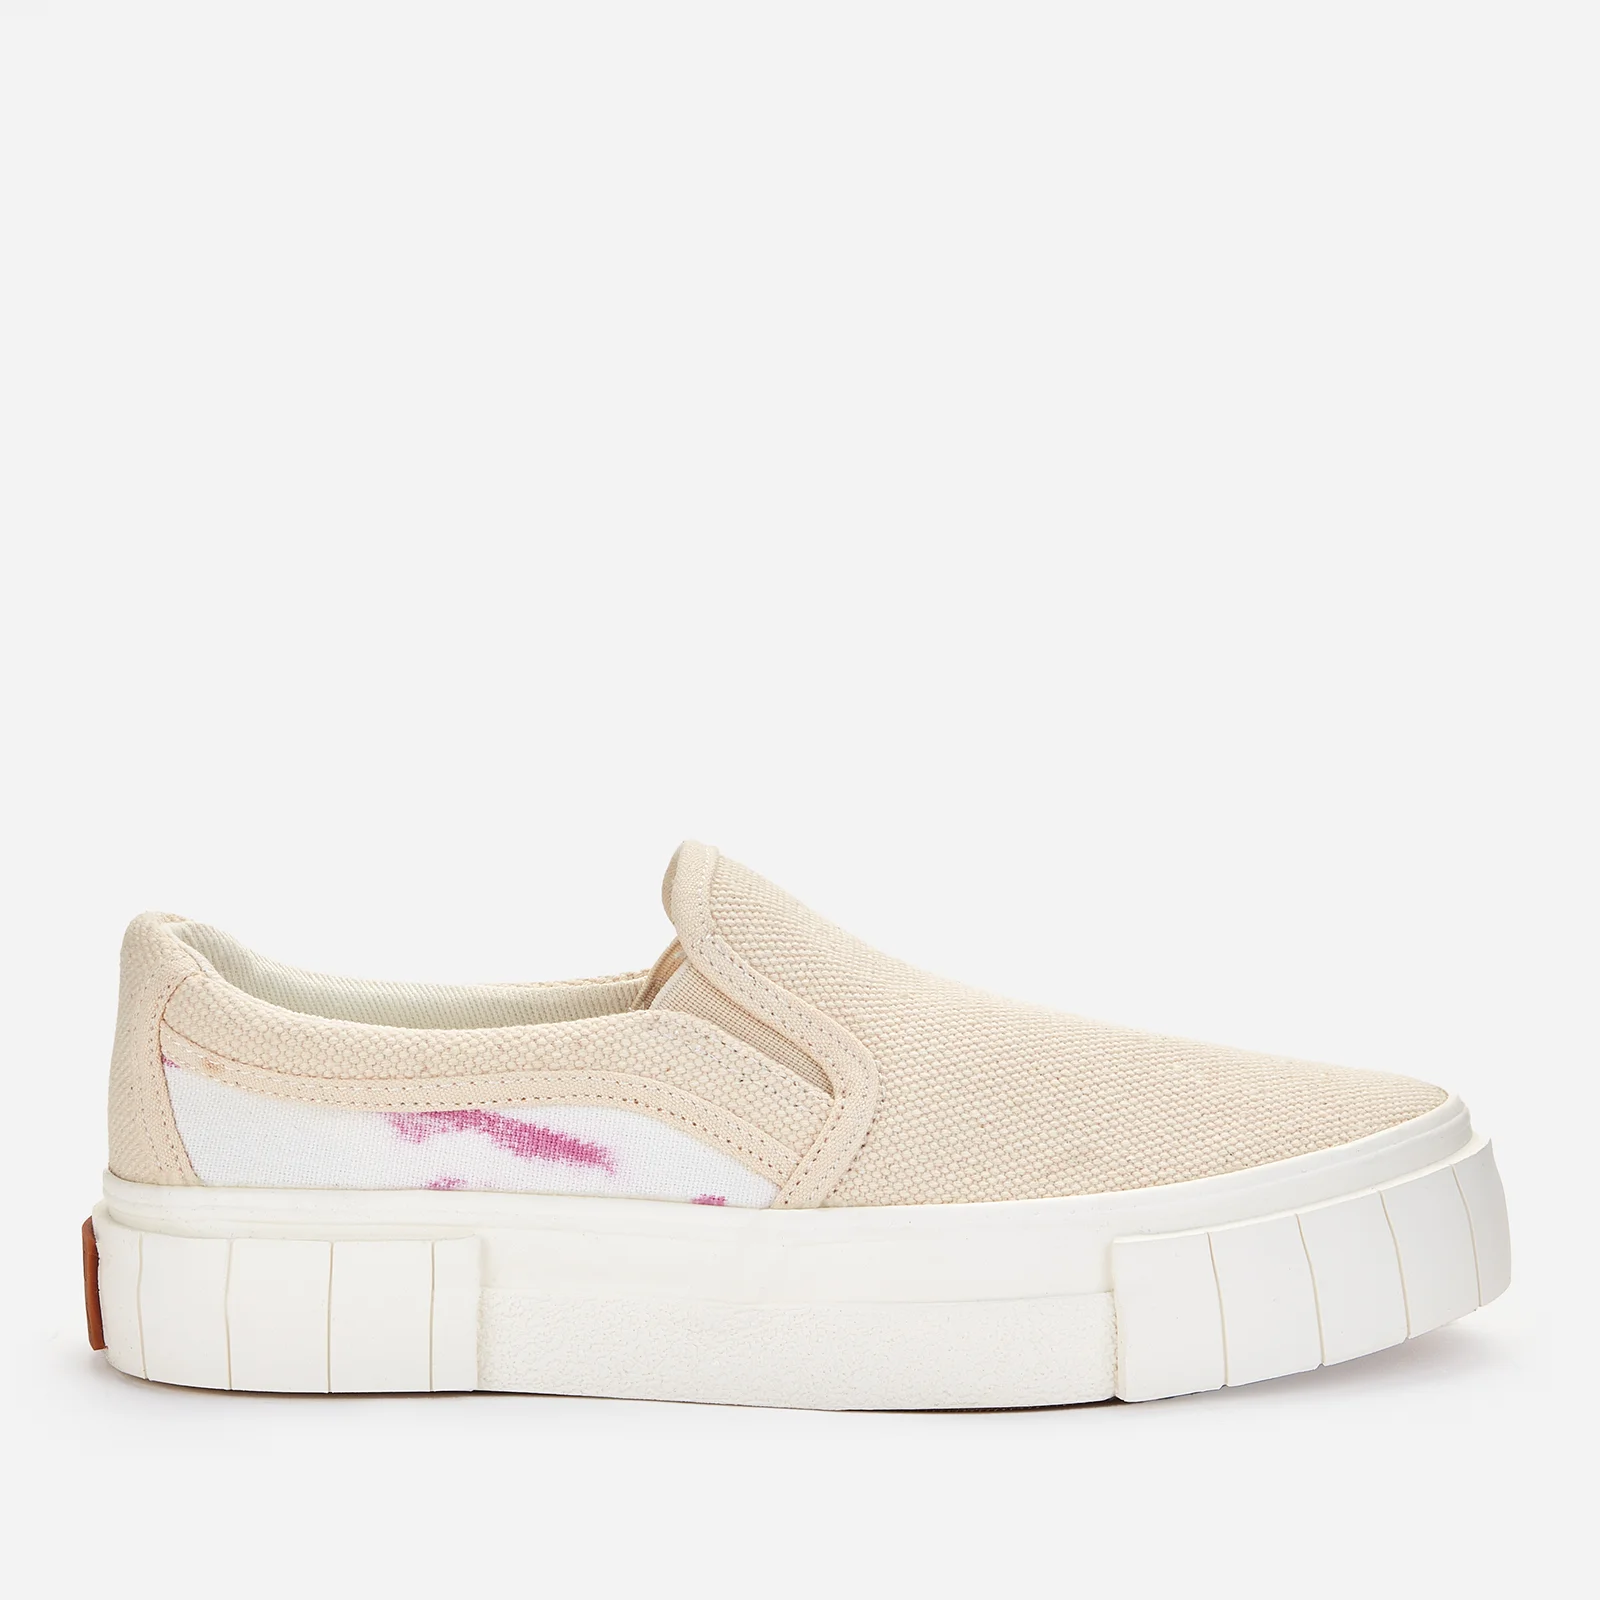 Good News Women's Ombre Yess Slip-On Trainers - Oatmeal/Purple Image 1